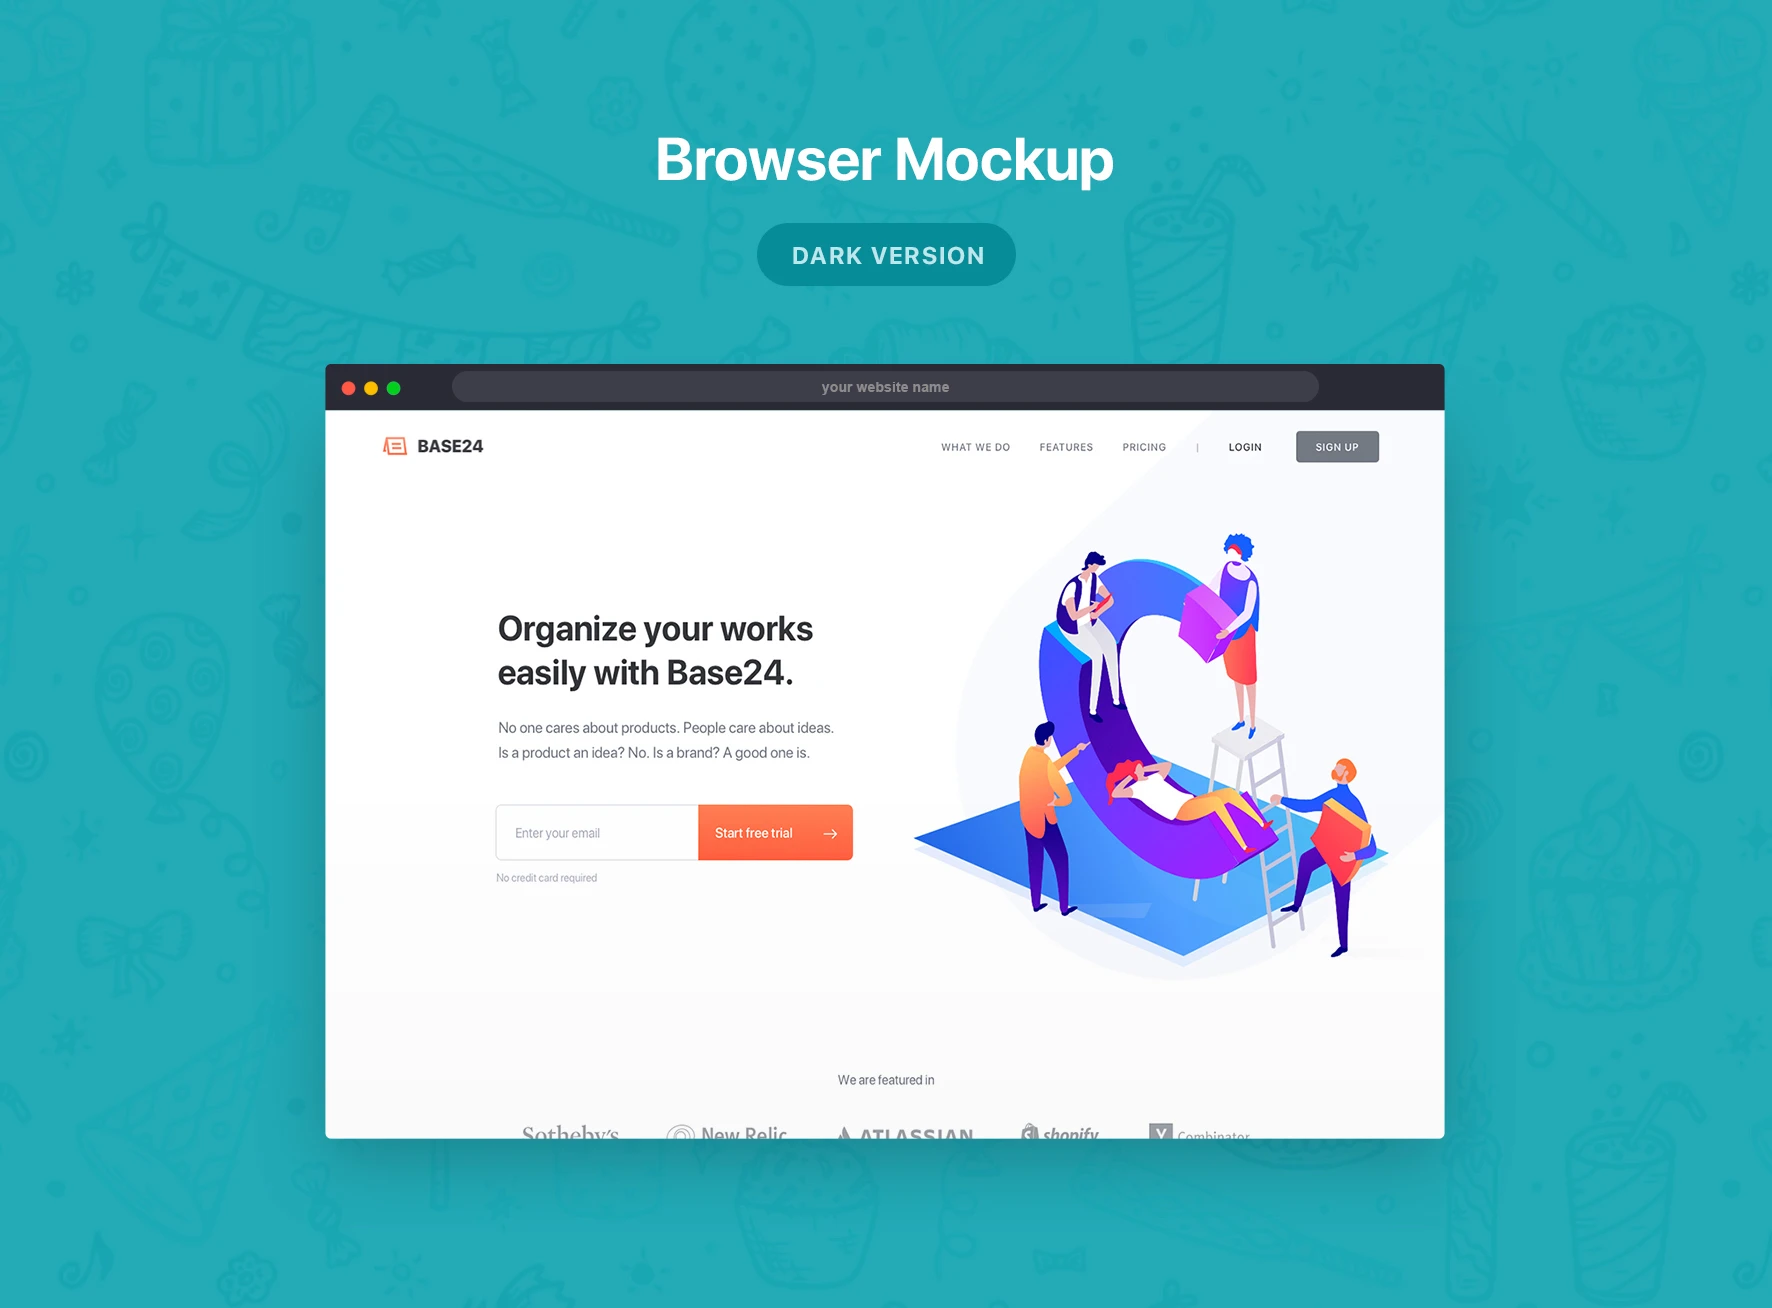 Safari Browser Mockup - Present your website in beautiful browsers. PSD and Sketch files included.